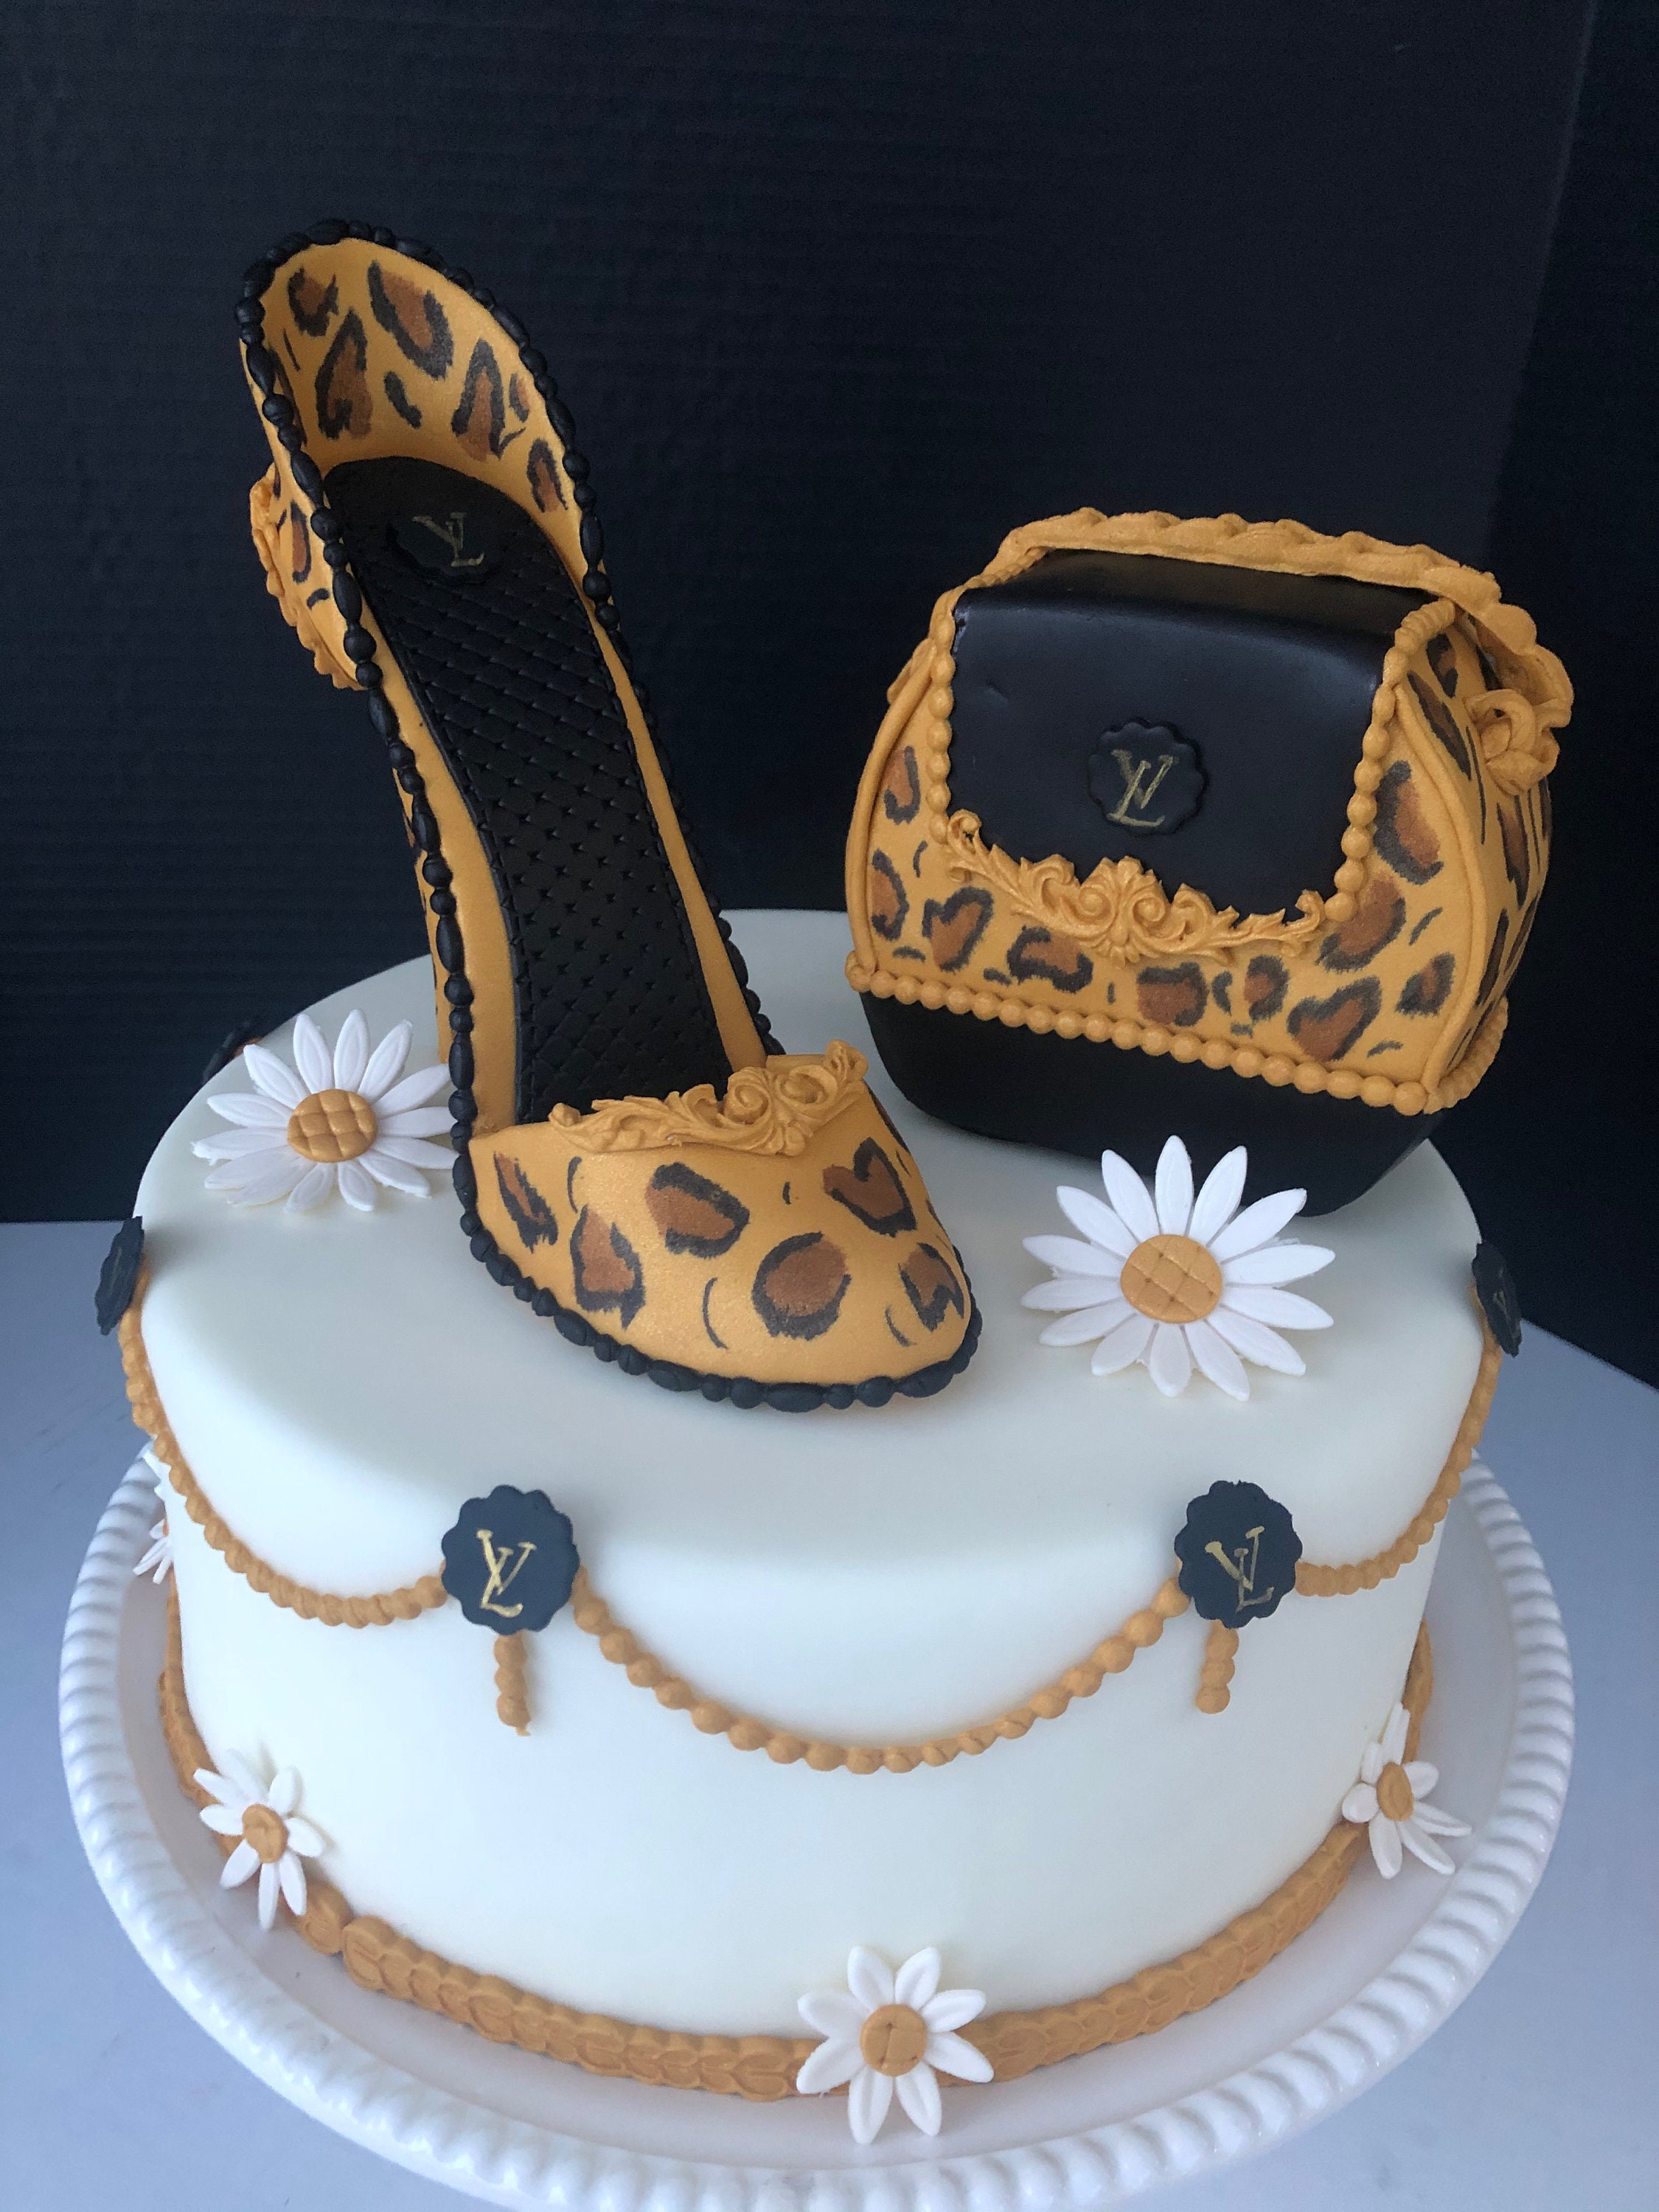 Designer Cakes By Abi - LV cake with make up toppers. . . . . . . . Edible  print: @edible.print . . . . . . . . #redvelvetcake #creamcheesefrosting # louisvuitton #